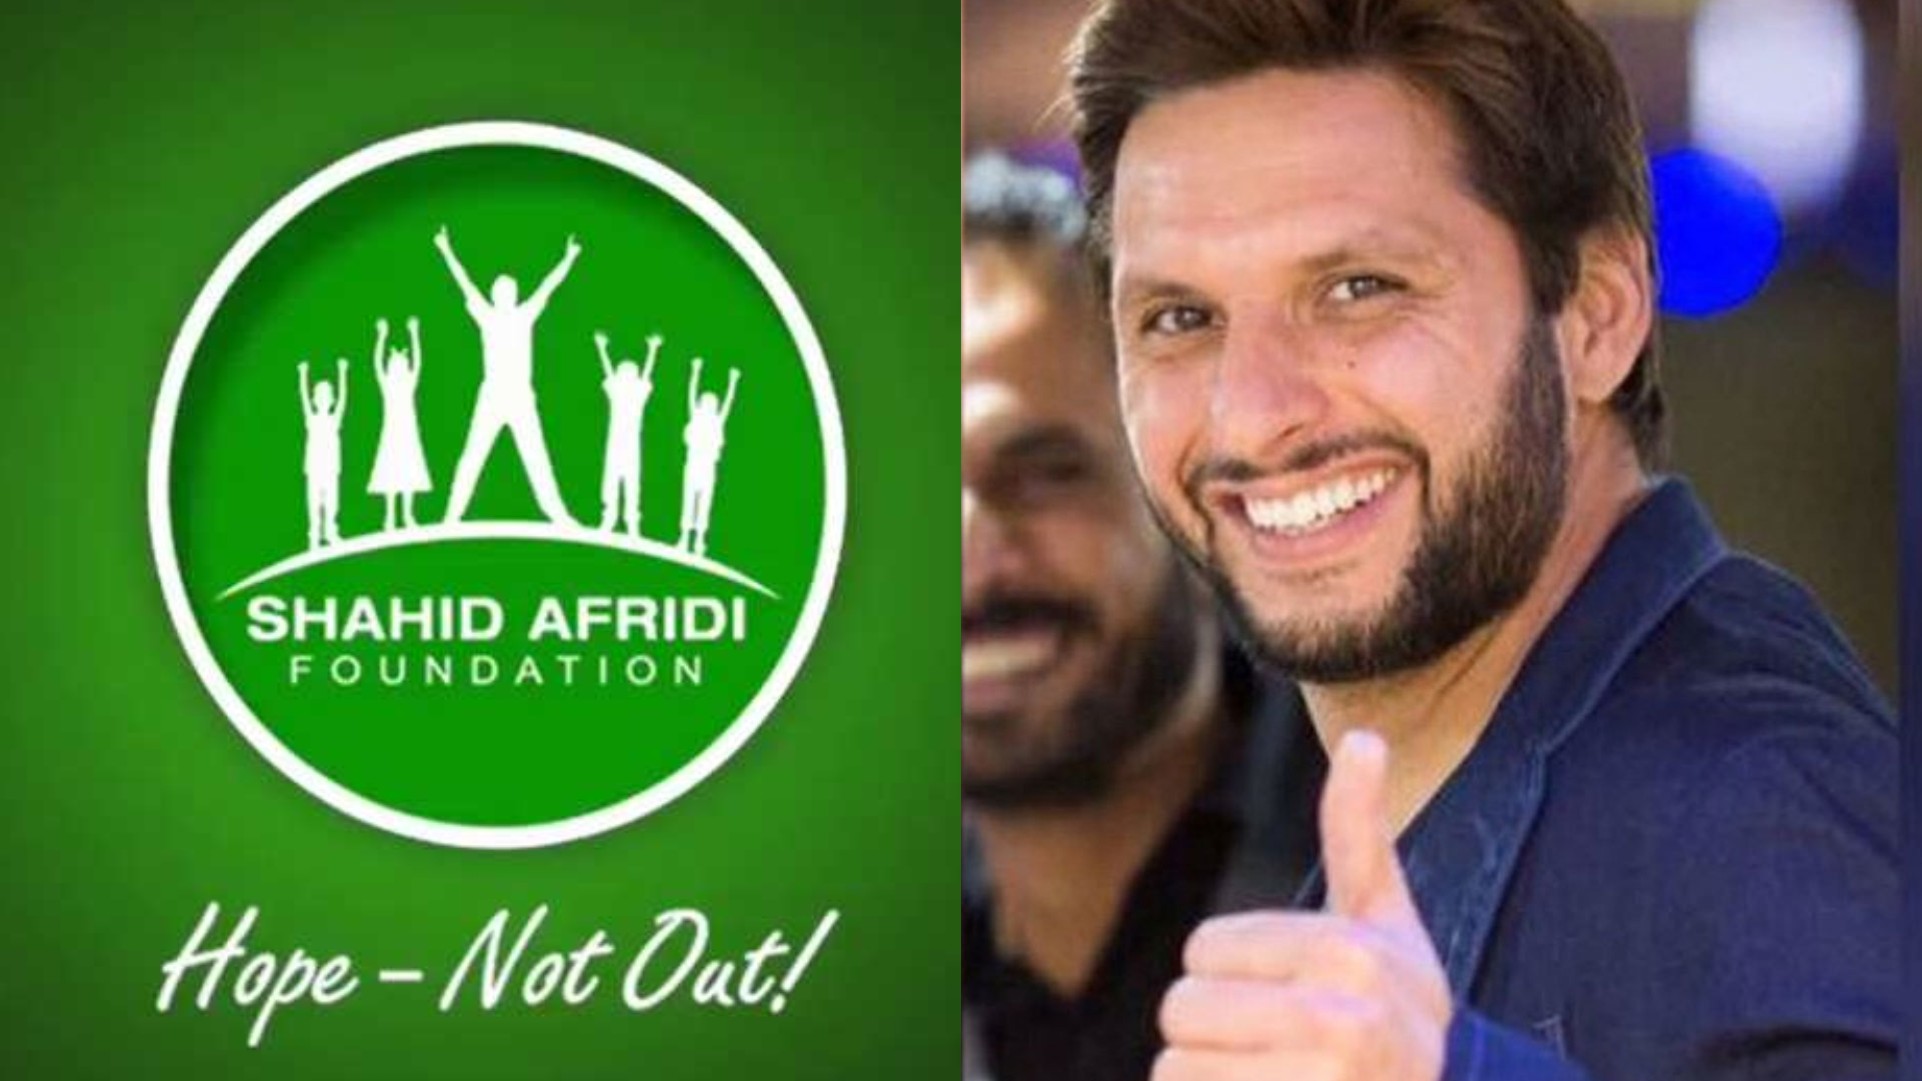 Pakistan cricketers to sport Shahid Afridi foundation logo as PCB fails to find sponsors